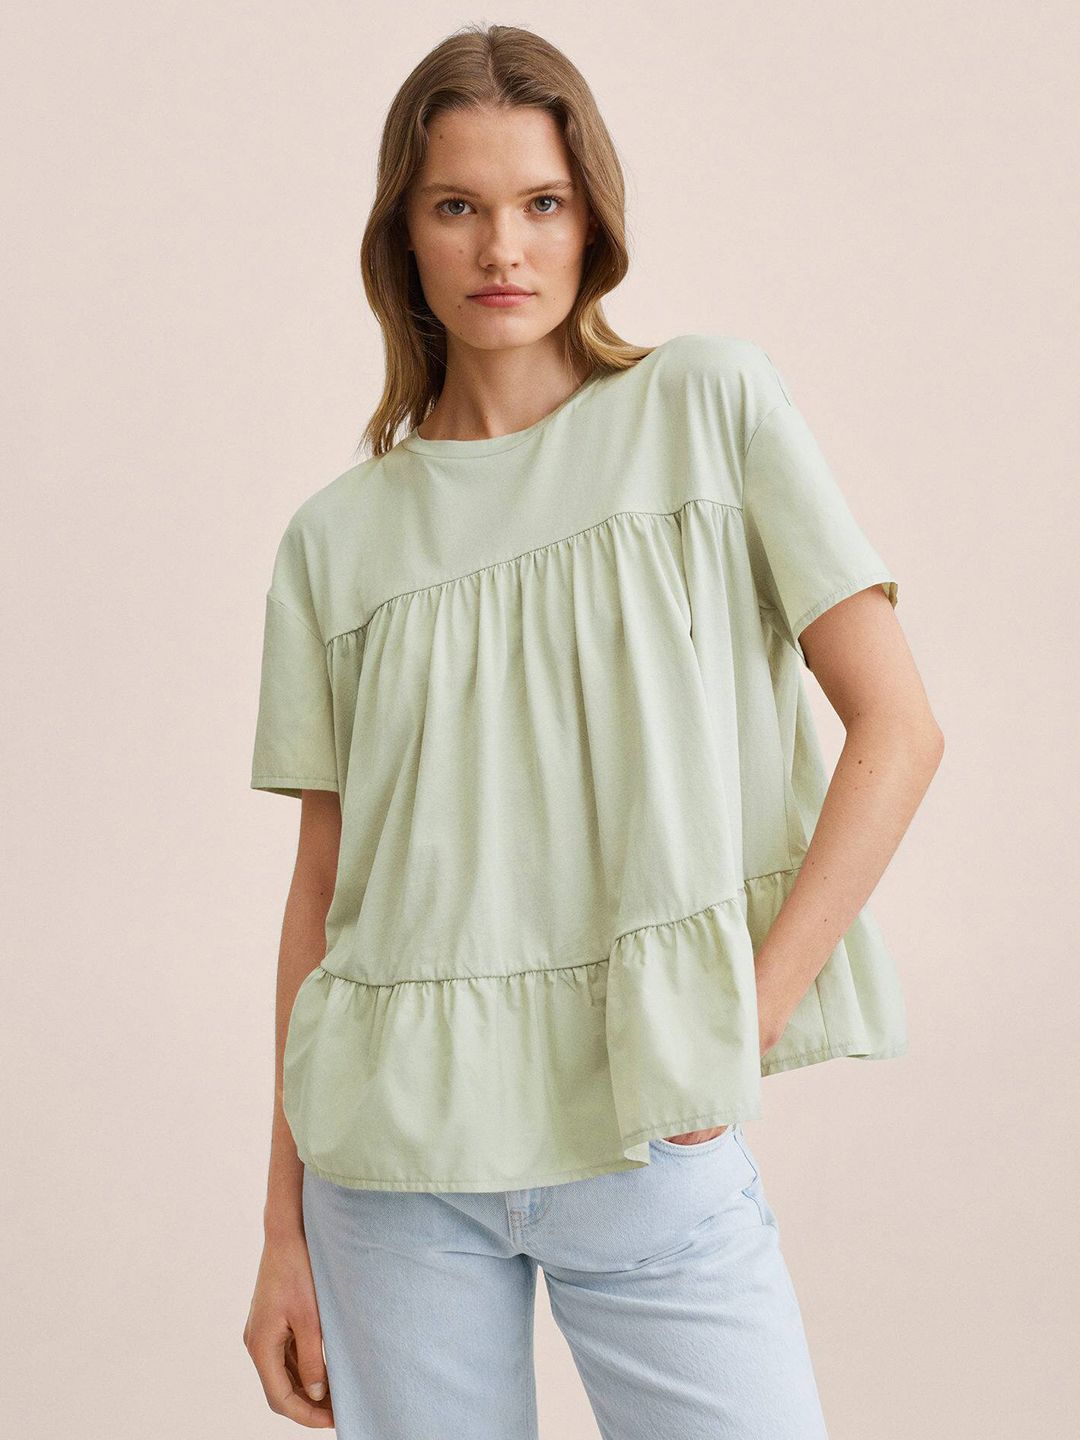 MANGO Green Solid Cotton Extended Sleeves Top Price in India